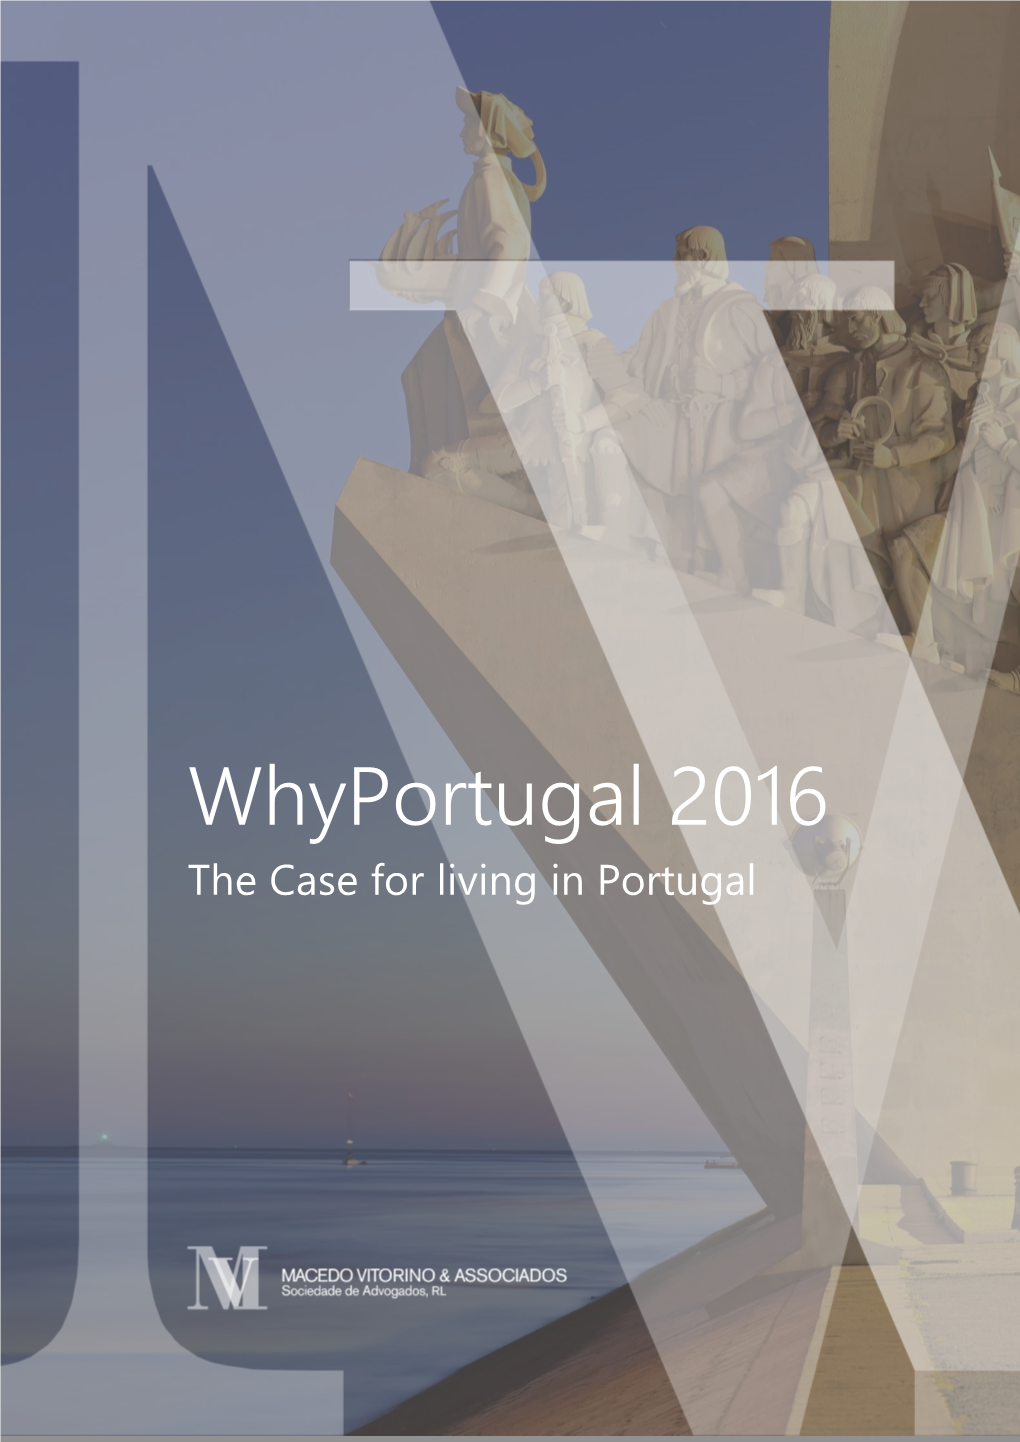 Whyportugal 2016